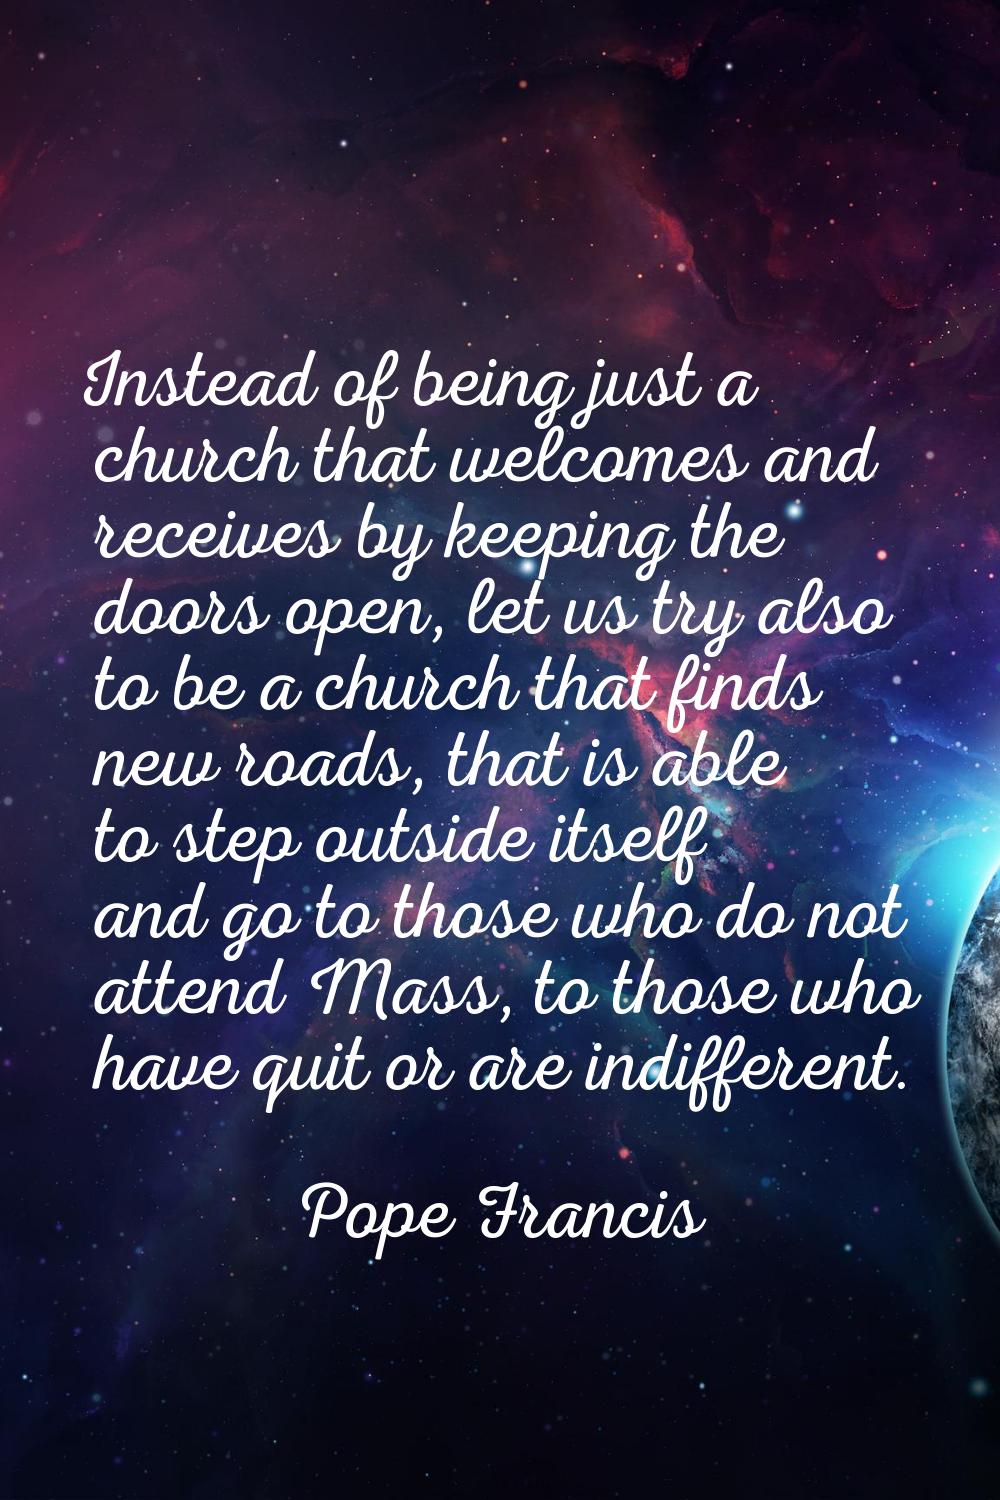 Instead of being just a church that welcomes and receives by keeping the doors open, let us try als